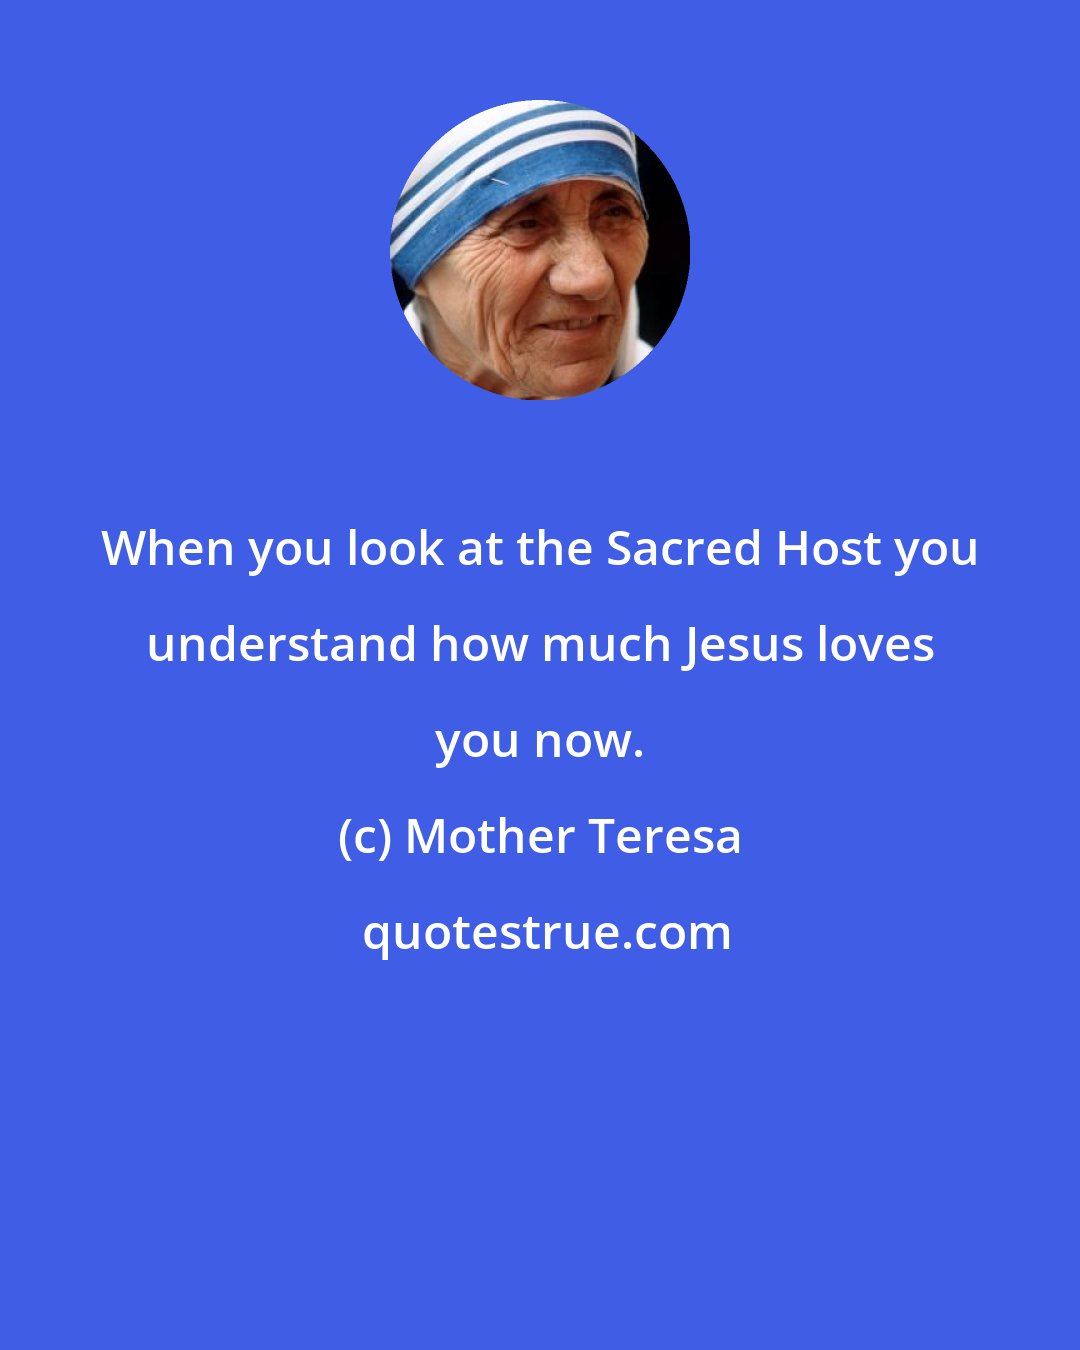 Mother Teresa: When you look at the Sacred Host you understand how much Jesus loves you now.